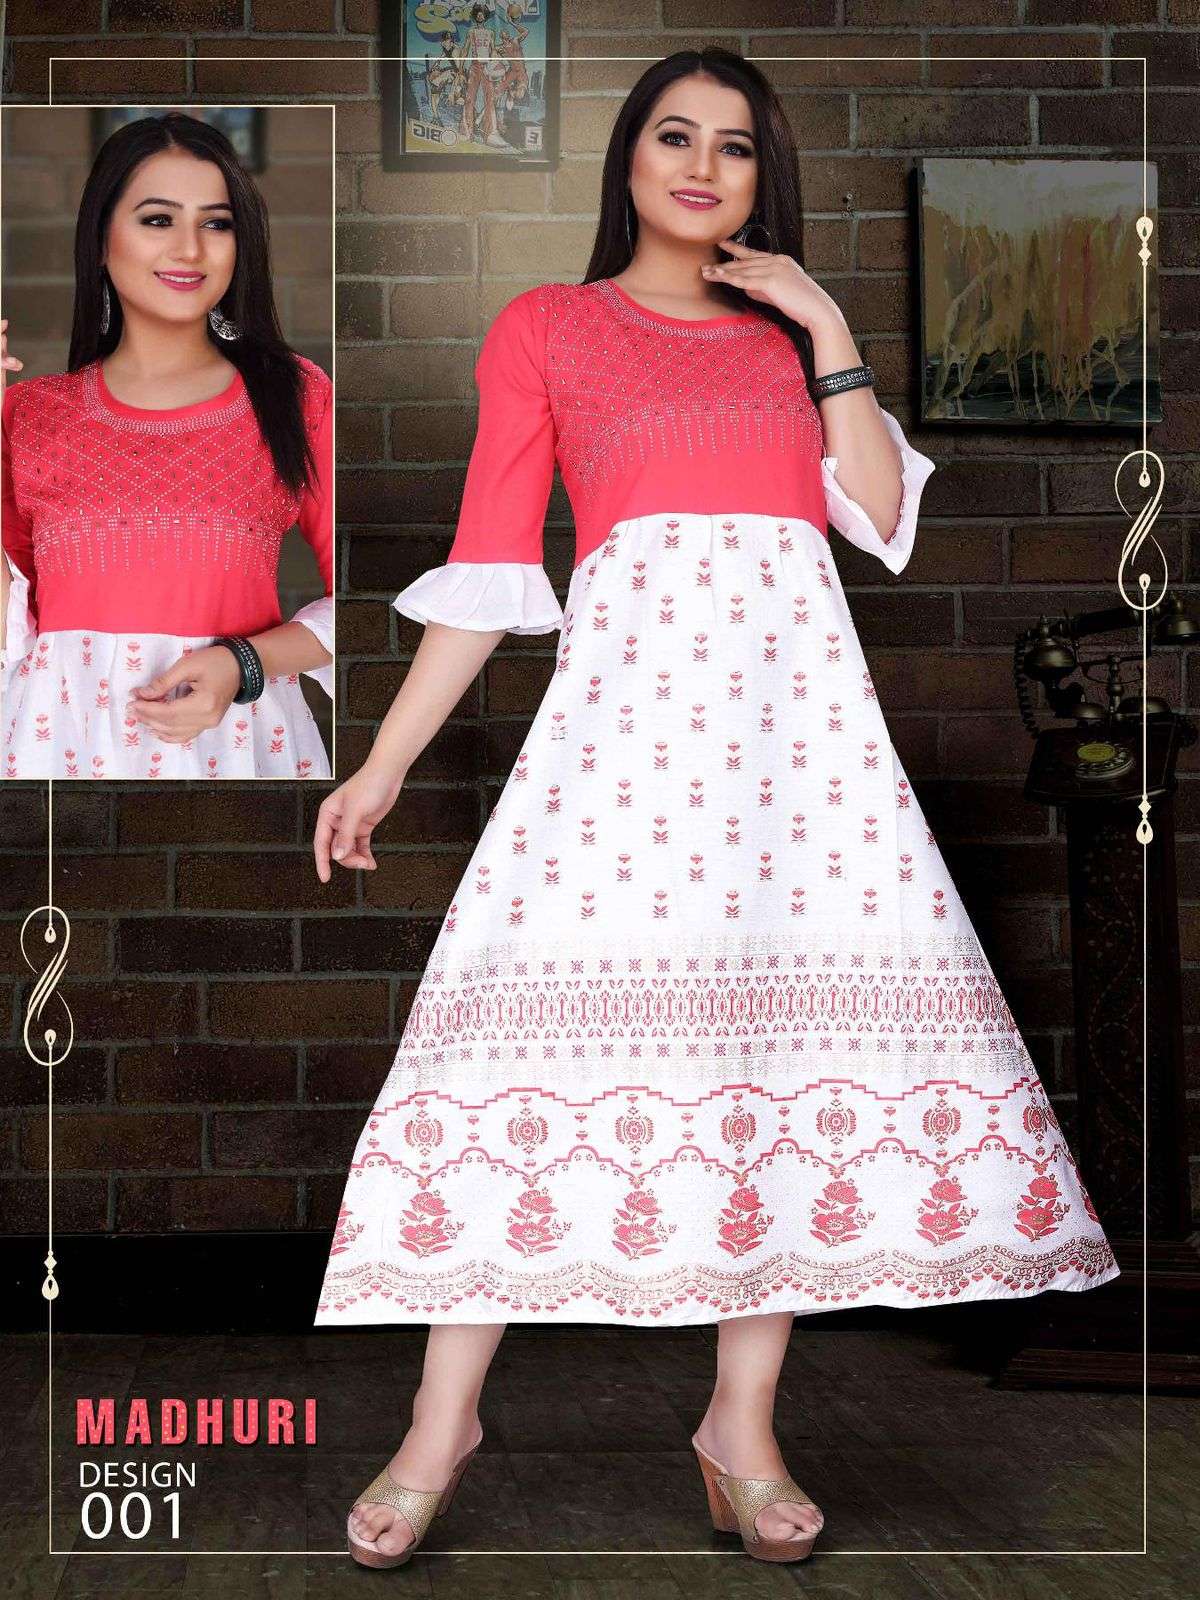 Buy Ultra Hybrid Queen Fashion's Readymade fully Stiched Kurti tops Printed  kurtis fabric- cotton with table print size XL chest 